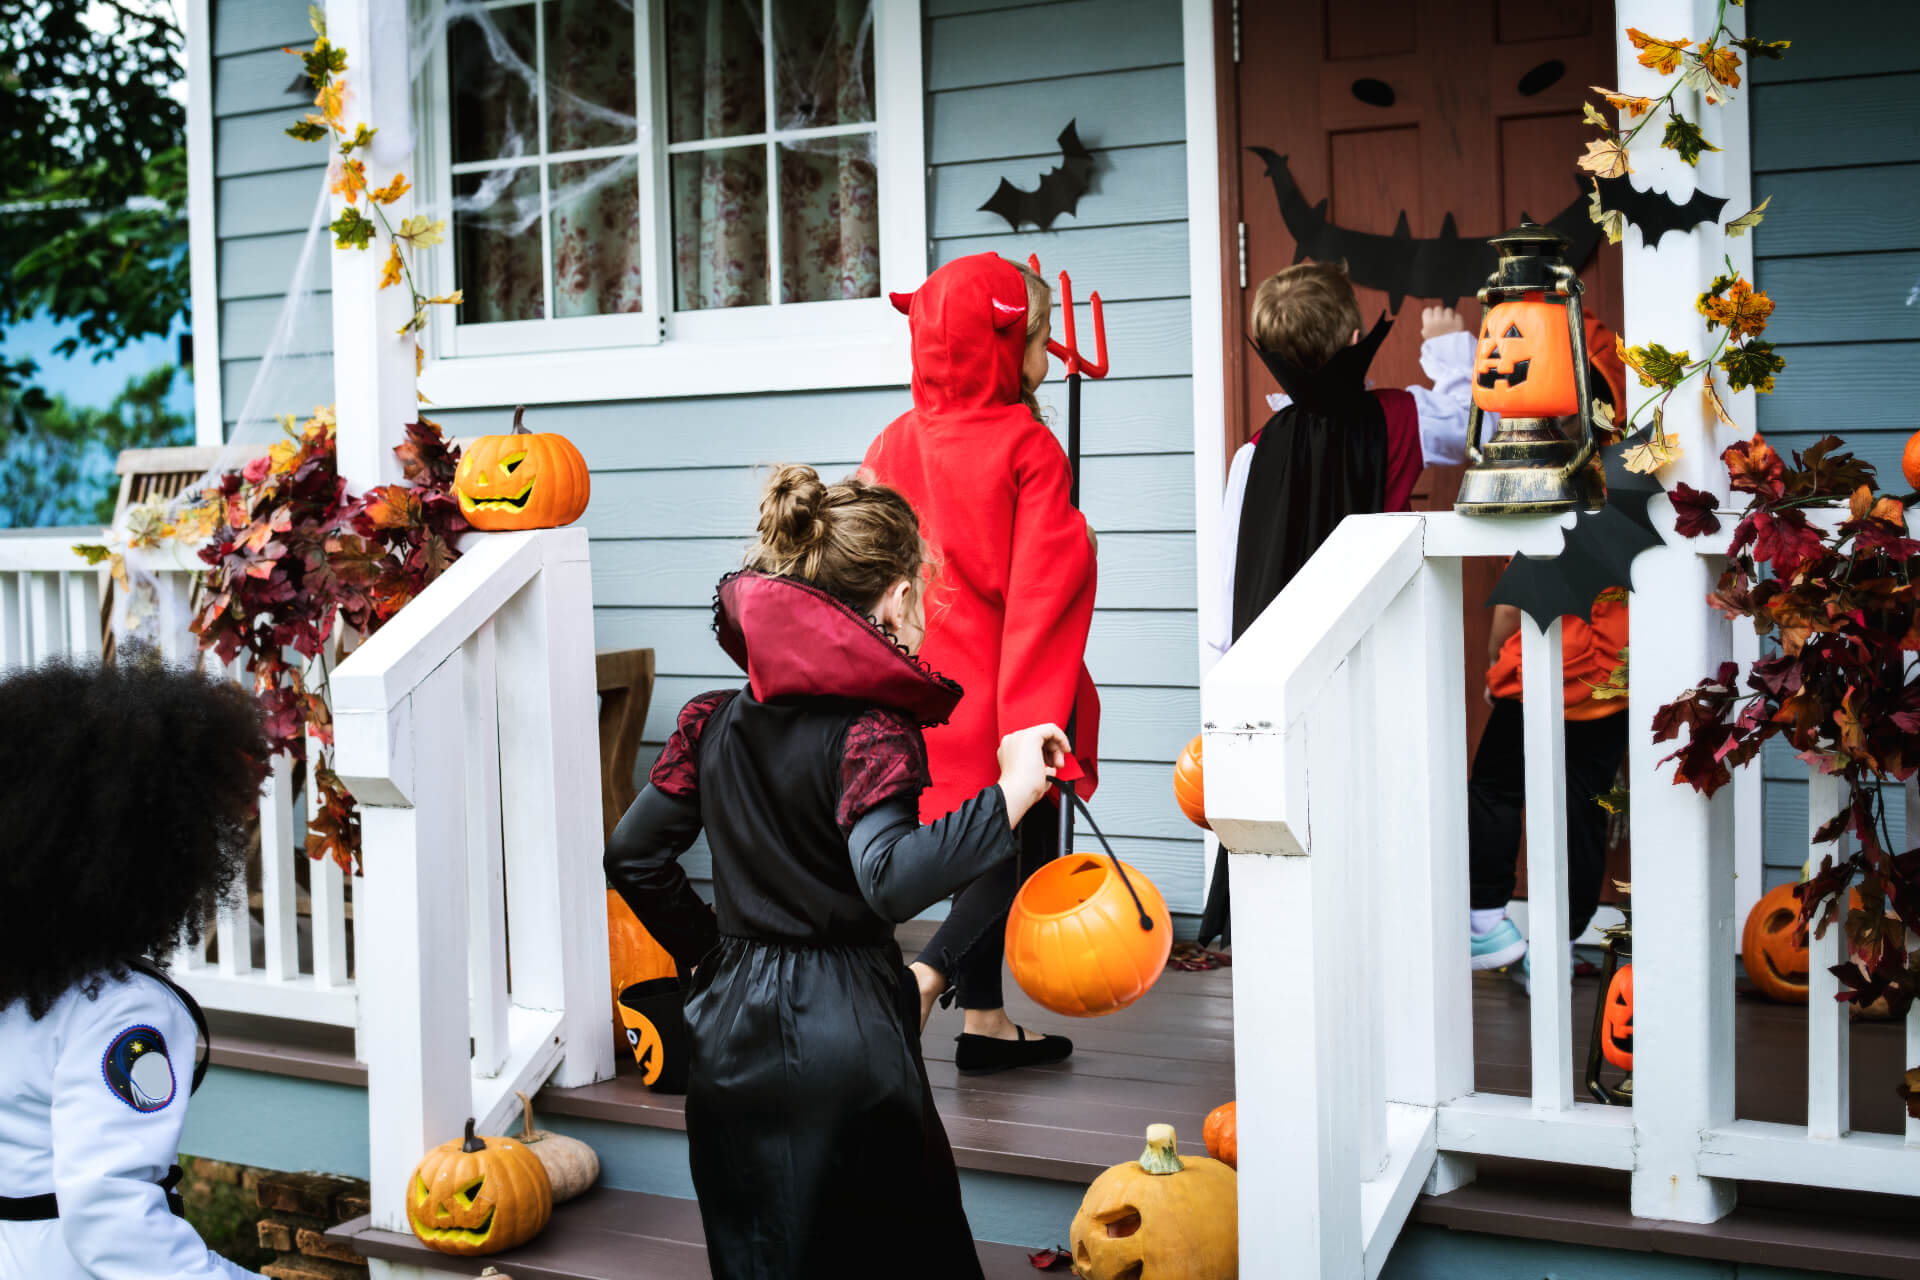 Experience Halloween in a new way with our kids' tips: Escape Rooms, party ideas, and safe trick-or-treating!